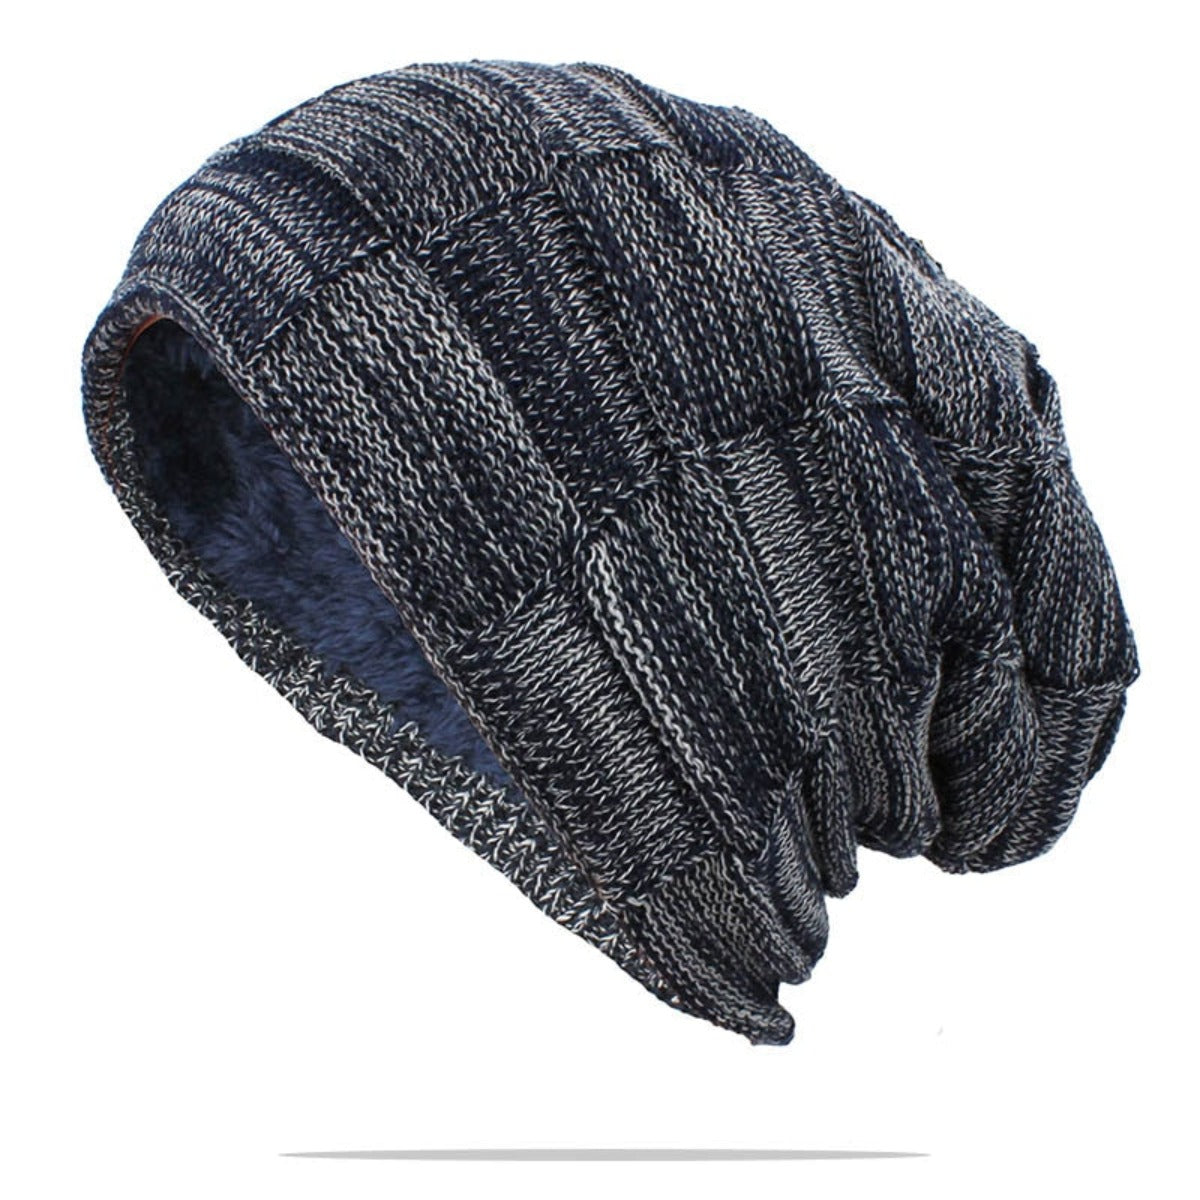 A high-quality Casual Winter Knitted Beanie Hat with a striped pattern, perfect for winter.